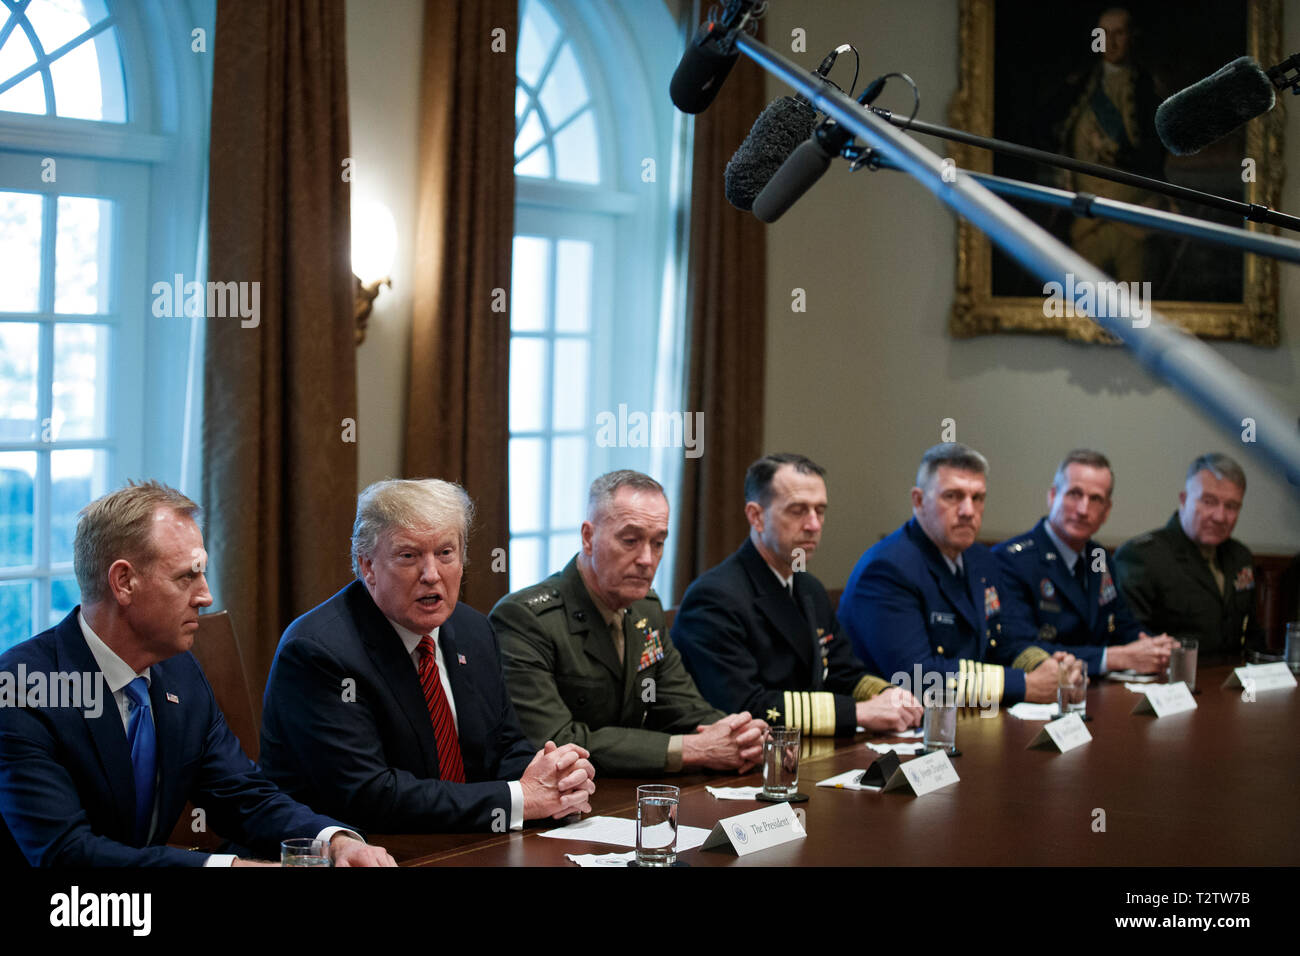 US President Donald J. Trump (L-2), with Acting Secretary of Defense Patrick Shanahan (L) and Chairman of the Joint Chiefs of Staff General Joseph Dunford (L-3), delivers remarks during a briefing by senior military leaders in the Cabinet Room of the White House in Washington, DC, USA, 03 April 2019. Following the briefing President Trump will host a dinner for the officials. Credit: Shawn Thew/Pool via CNP /MediaPunch Stock Photo